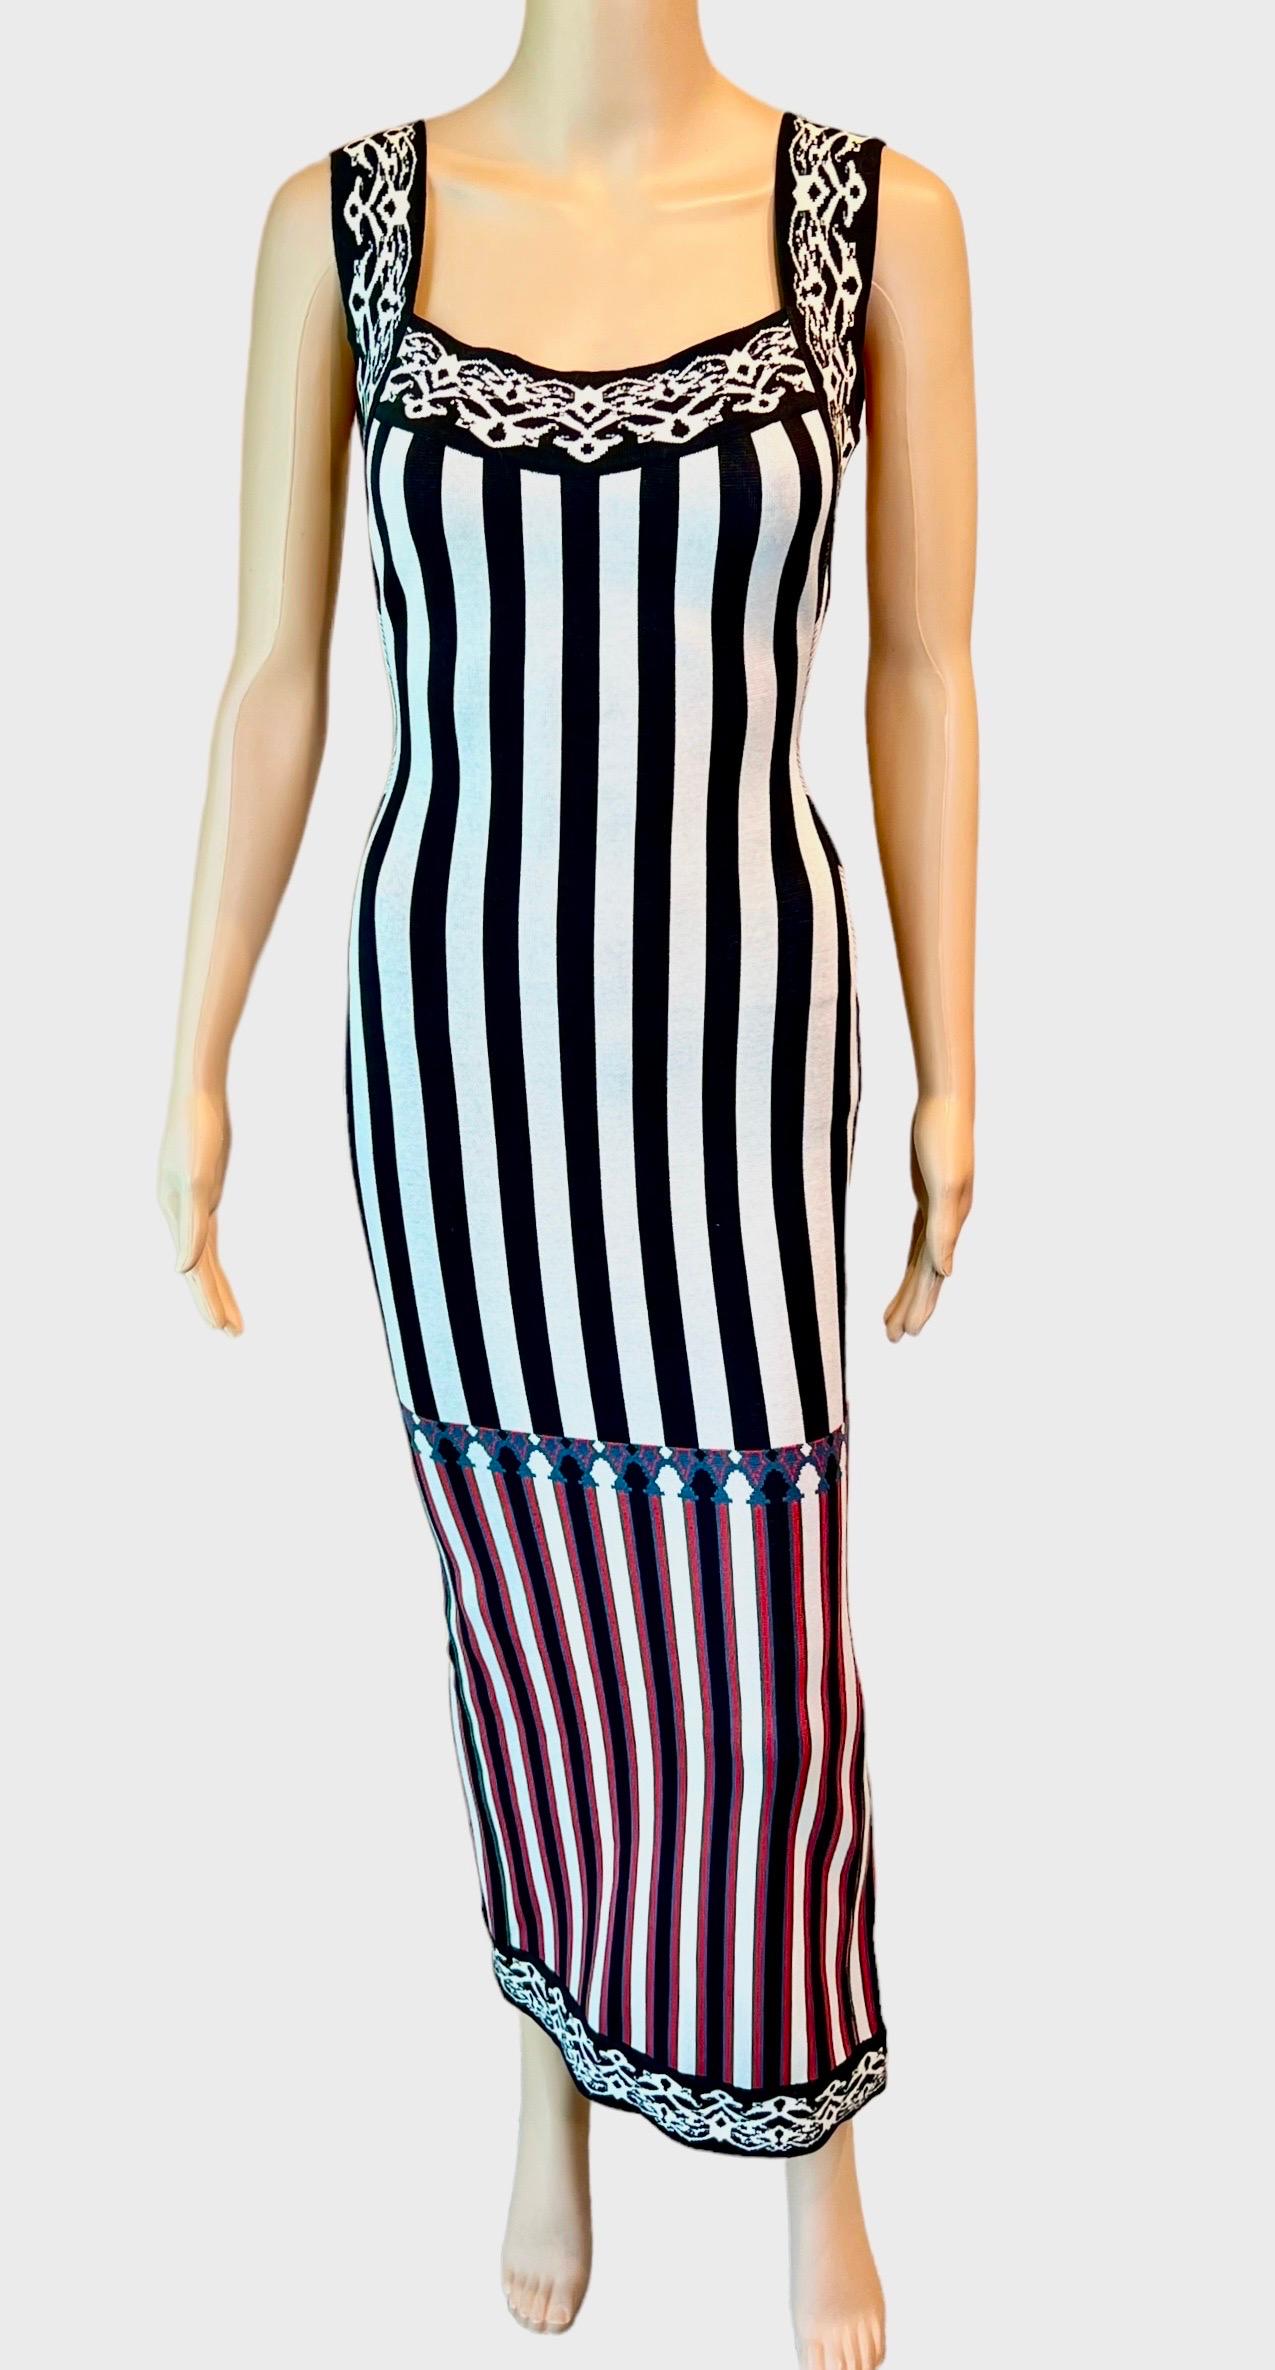 Azzedine Alaia S/S 1992 Runway Vintage Striped Bodycon Backless Maxi Dress Size S

Alaïa maxi bodycon dress with striped print throughout, squared neckline, open back and concealed zip closure at back.
